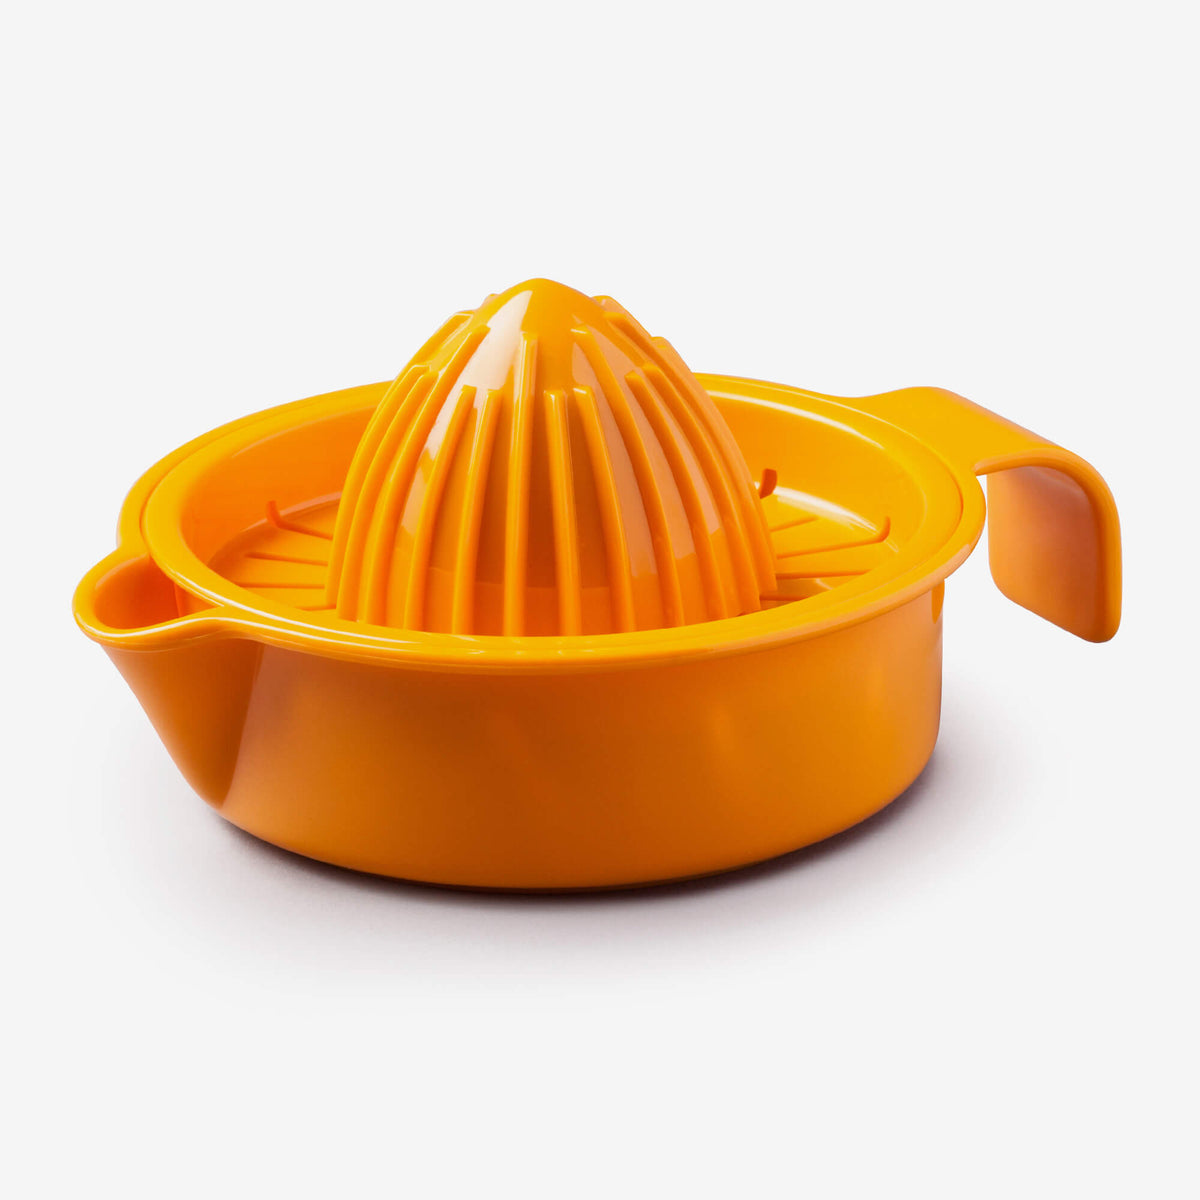 Citrus Juicer Dual Head with Collecting Bowl